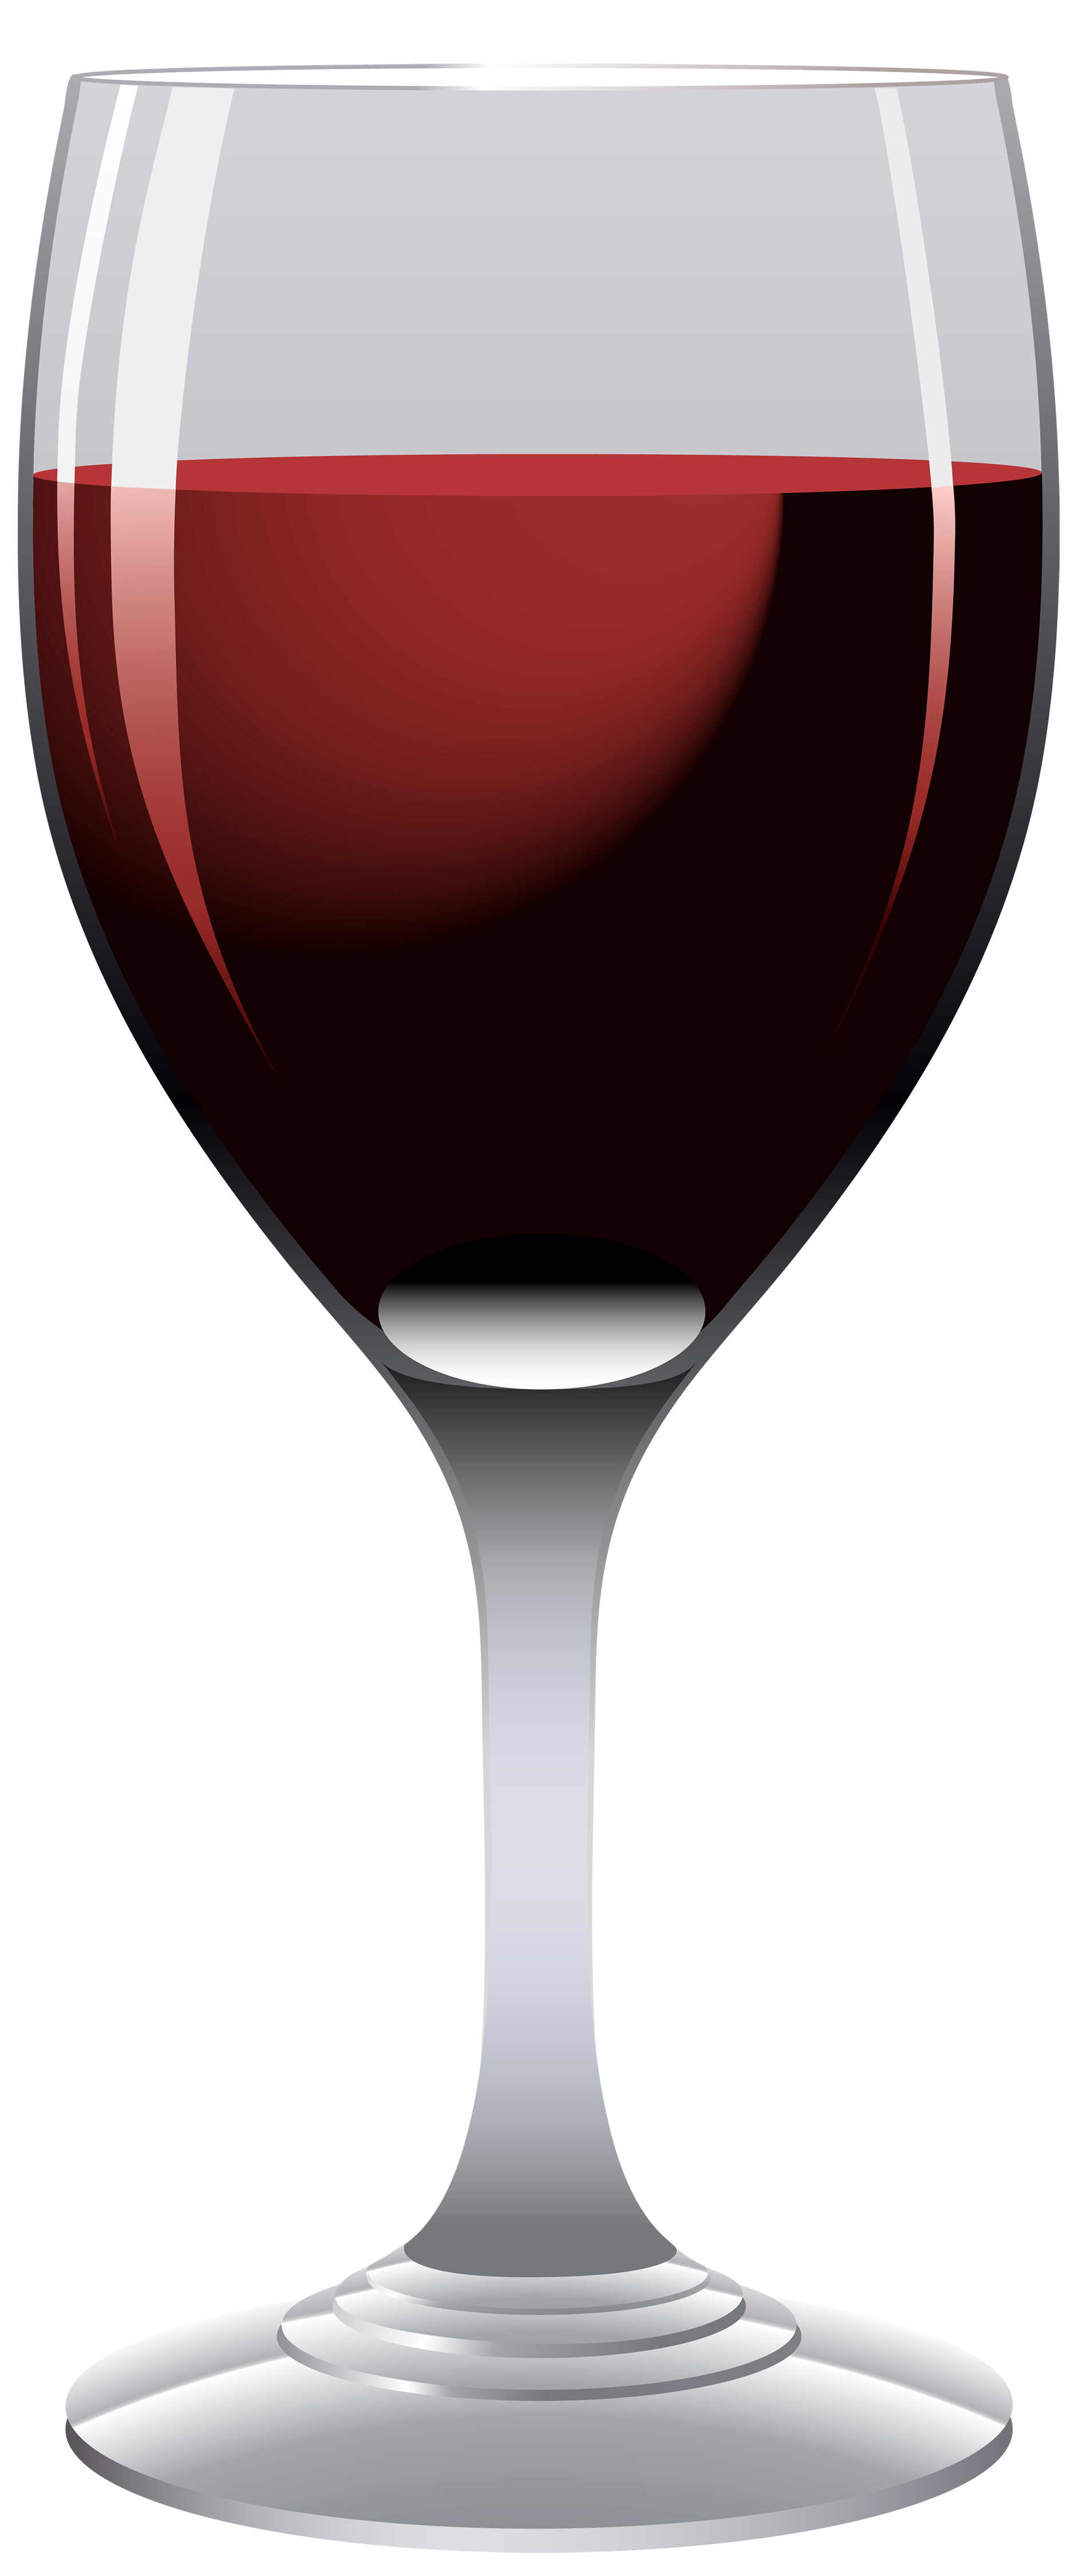 wine glass vector clipart - Clipground